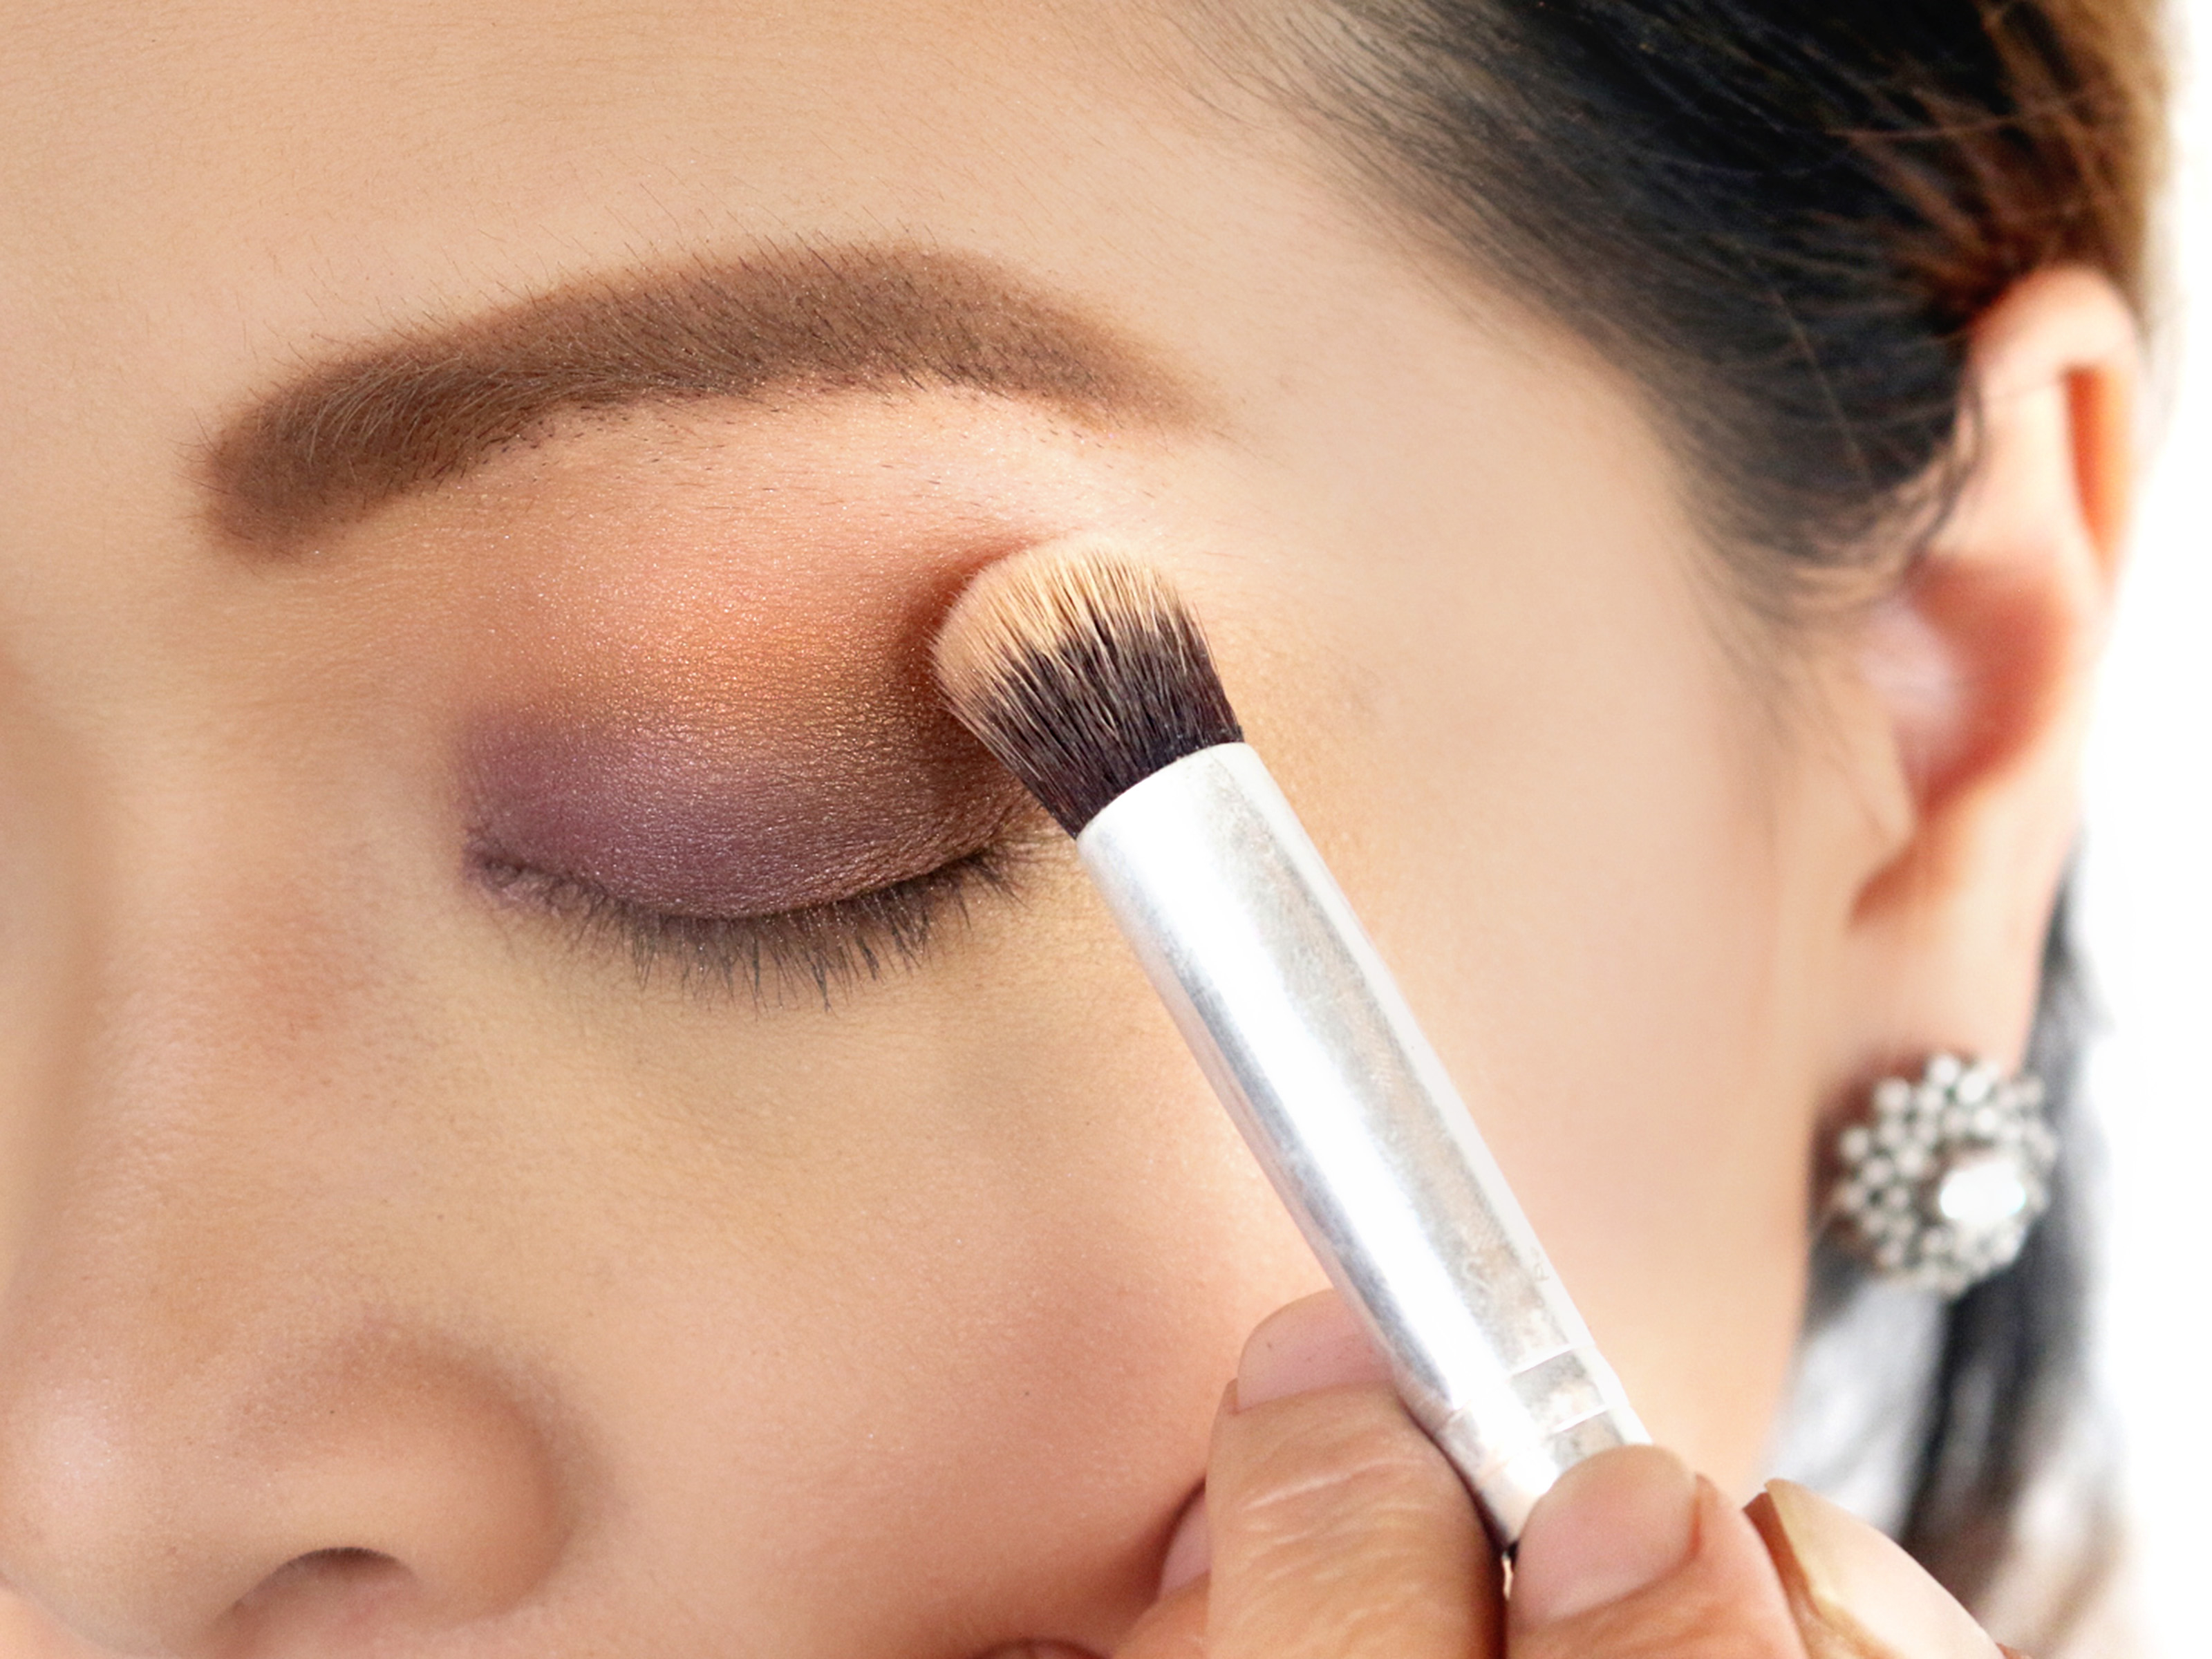 Best Eye Makeup For Brown Eyes How To Find The Best Eyeshadow For Your Eyes 11 Steps